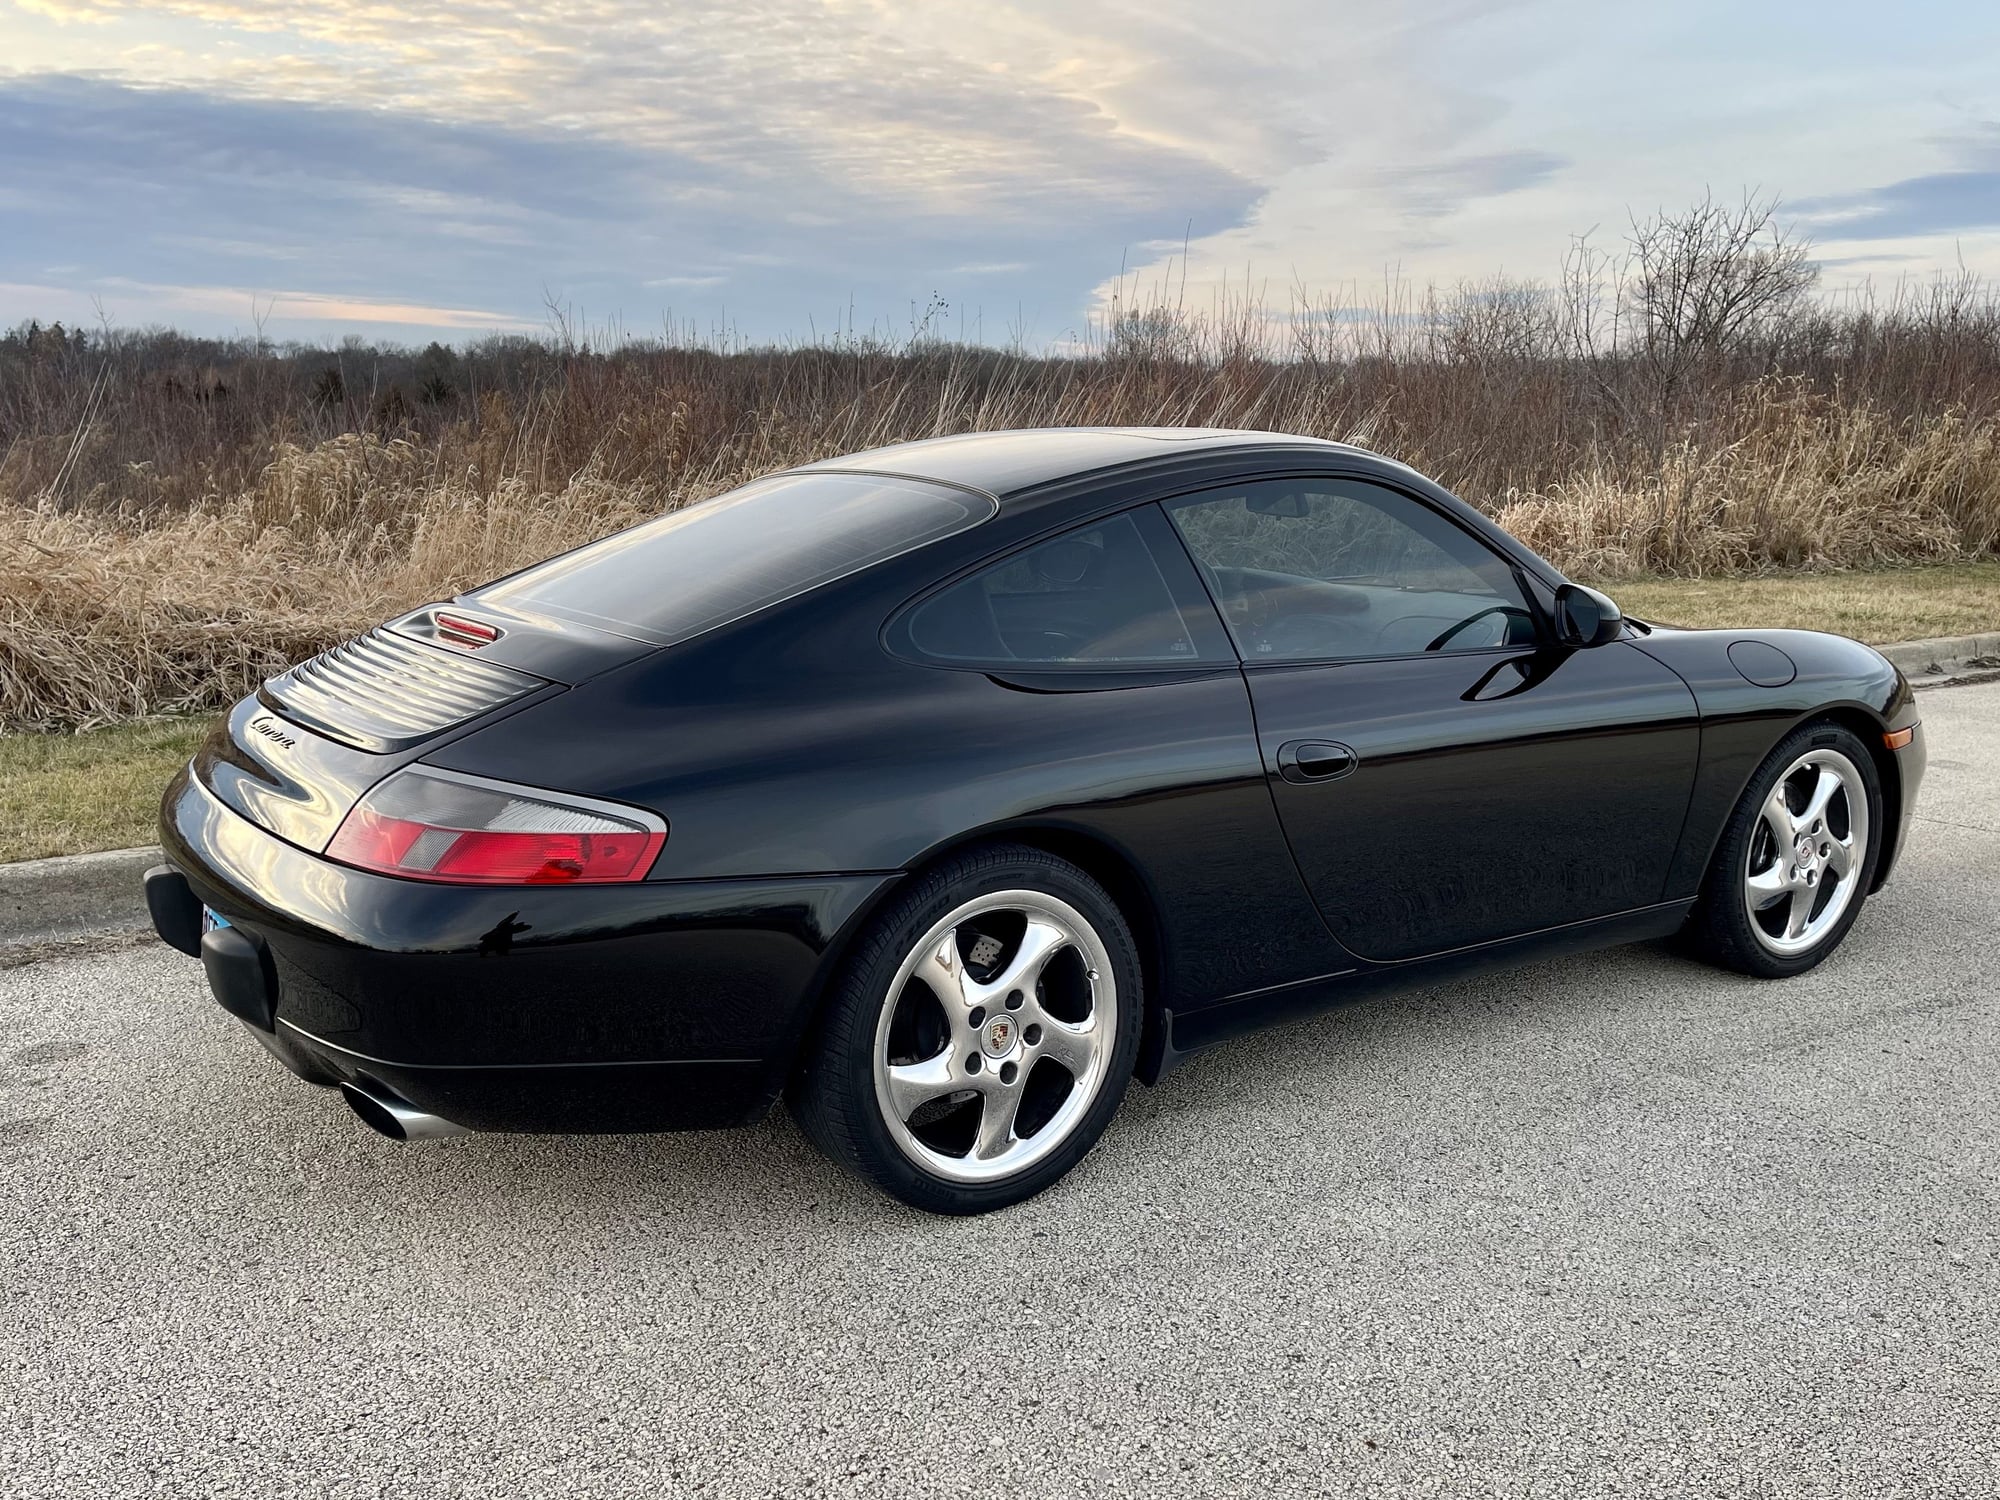 2000 Porsche 911 - 2000 Porsche 911 (996 C2), 6-speed manual, 75k mi, Black/Black, IMS/RMS/clutch, Clean - Used - VIN WP0AA2997YS622190 - 75,500 Miles - 6 cyl - 2WD - Manual - Coupe - Black - Chicago, IL 60010, United States